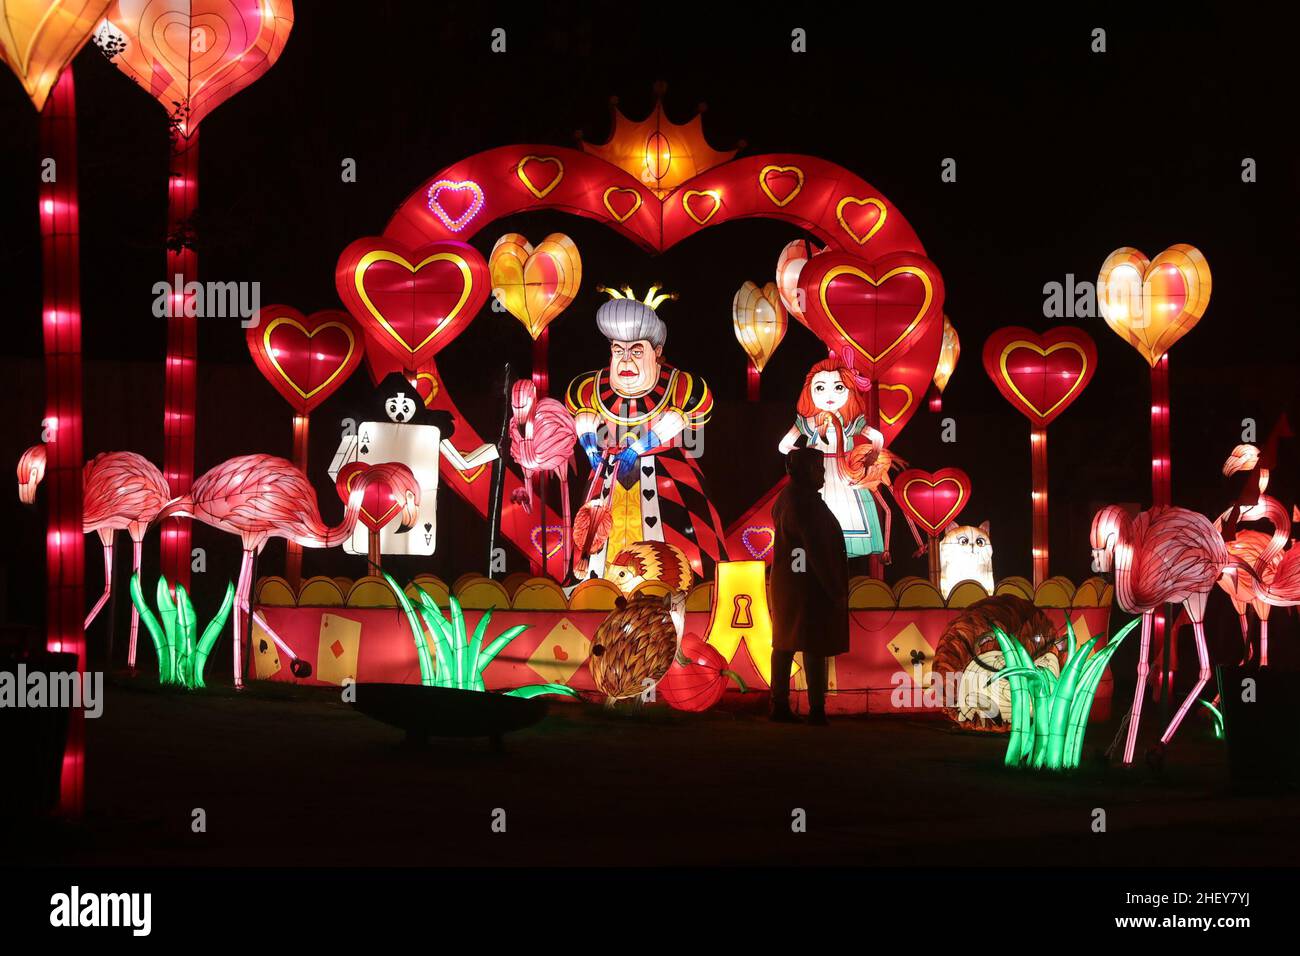 Antwerp, Belgium. 12th Jan, 2022. People view light installations during  the sixth edition of China light festival themed "Alice in Wonderland" at  the Antwerp Zoo in Antwerp, Belgium, Jan. 12, 2022. Credit: